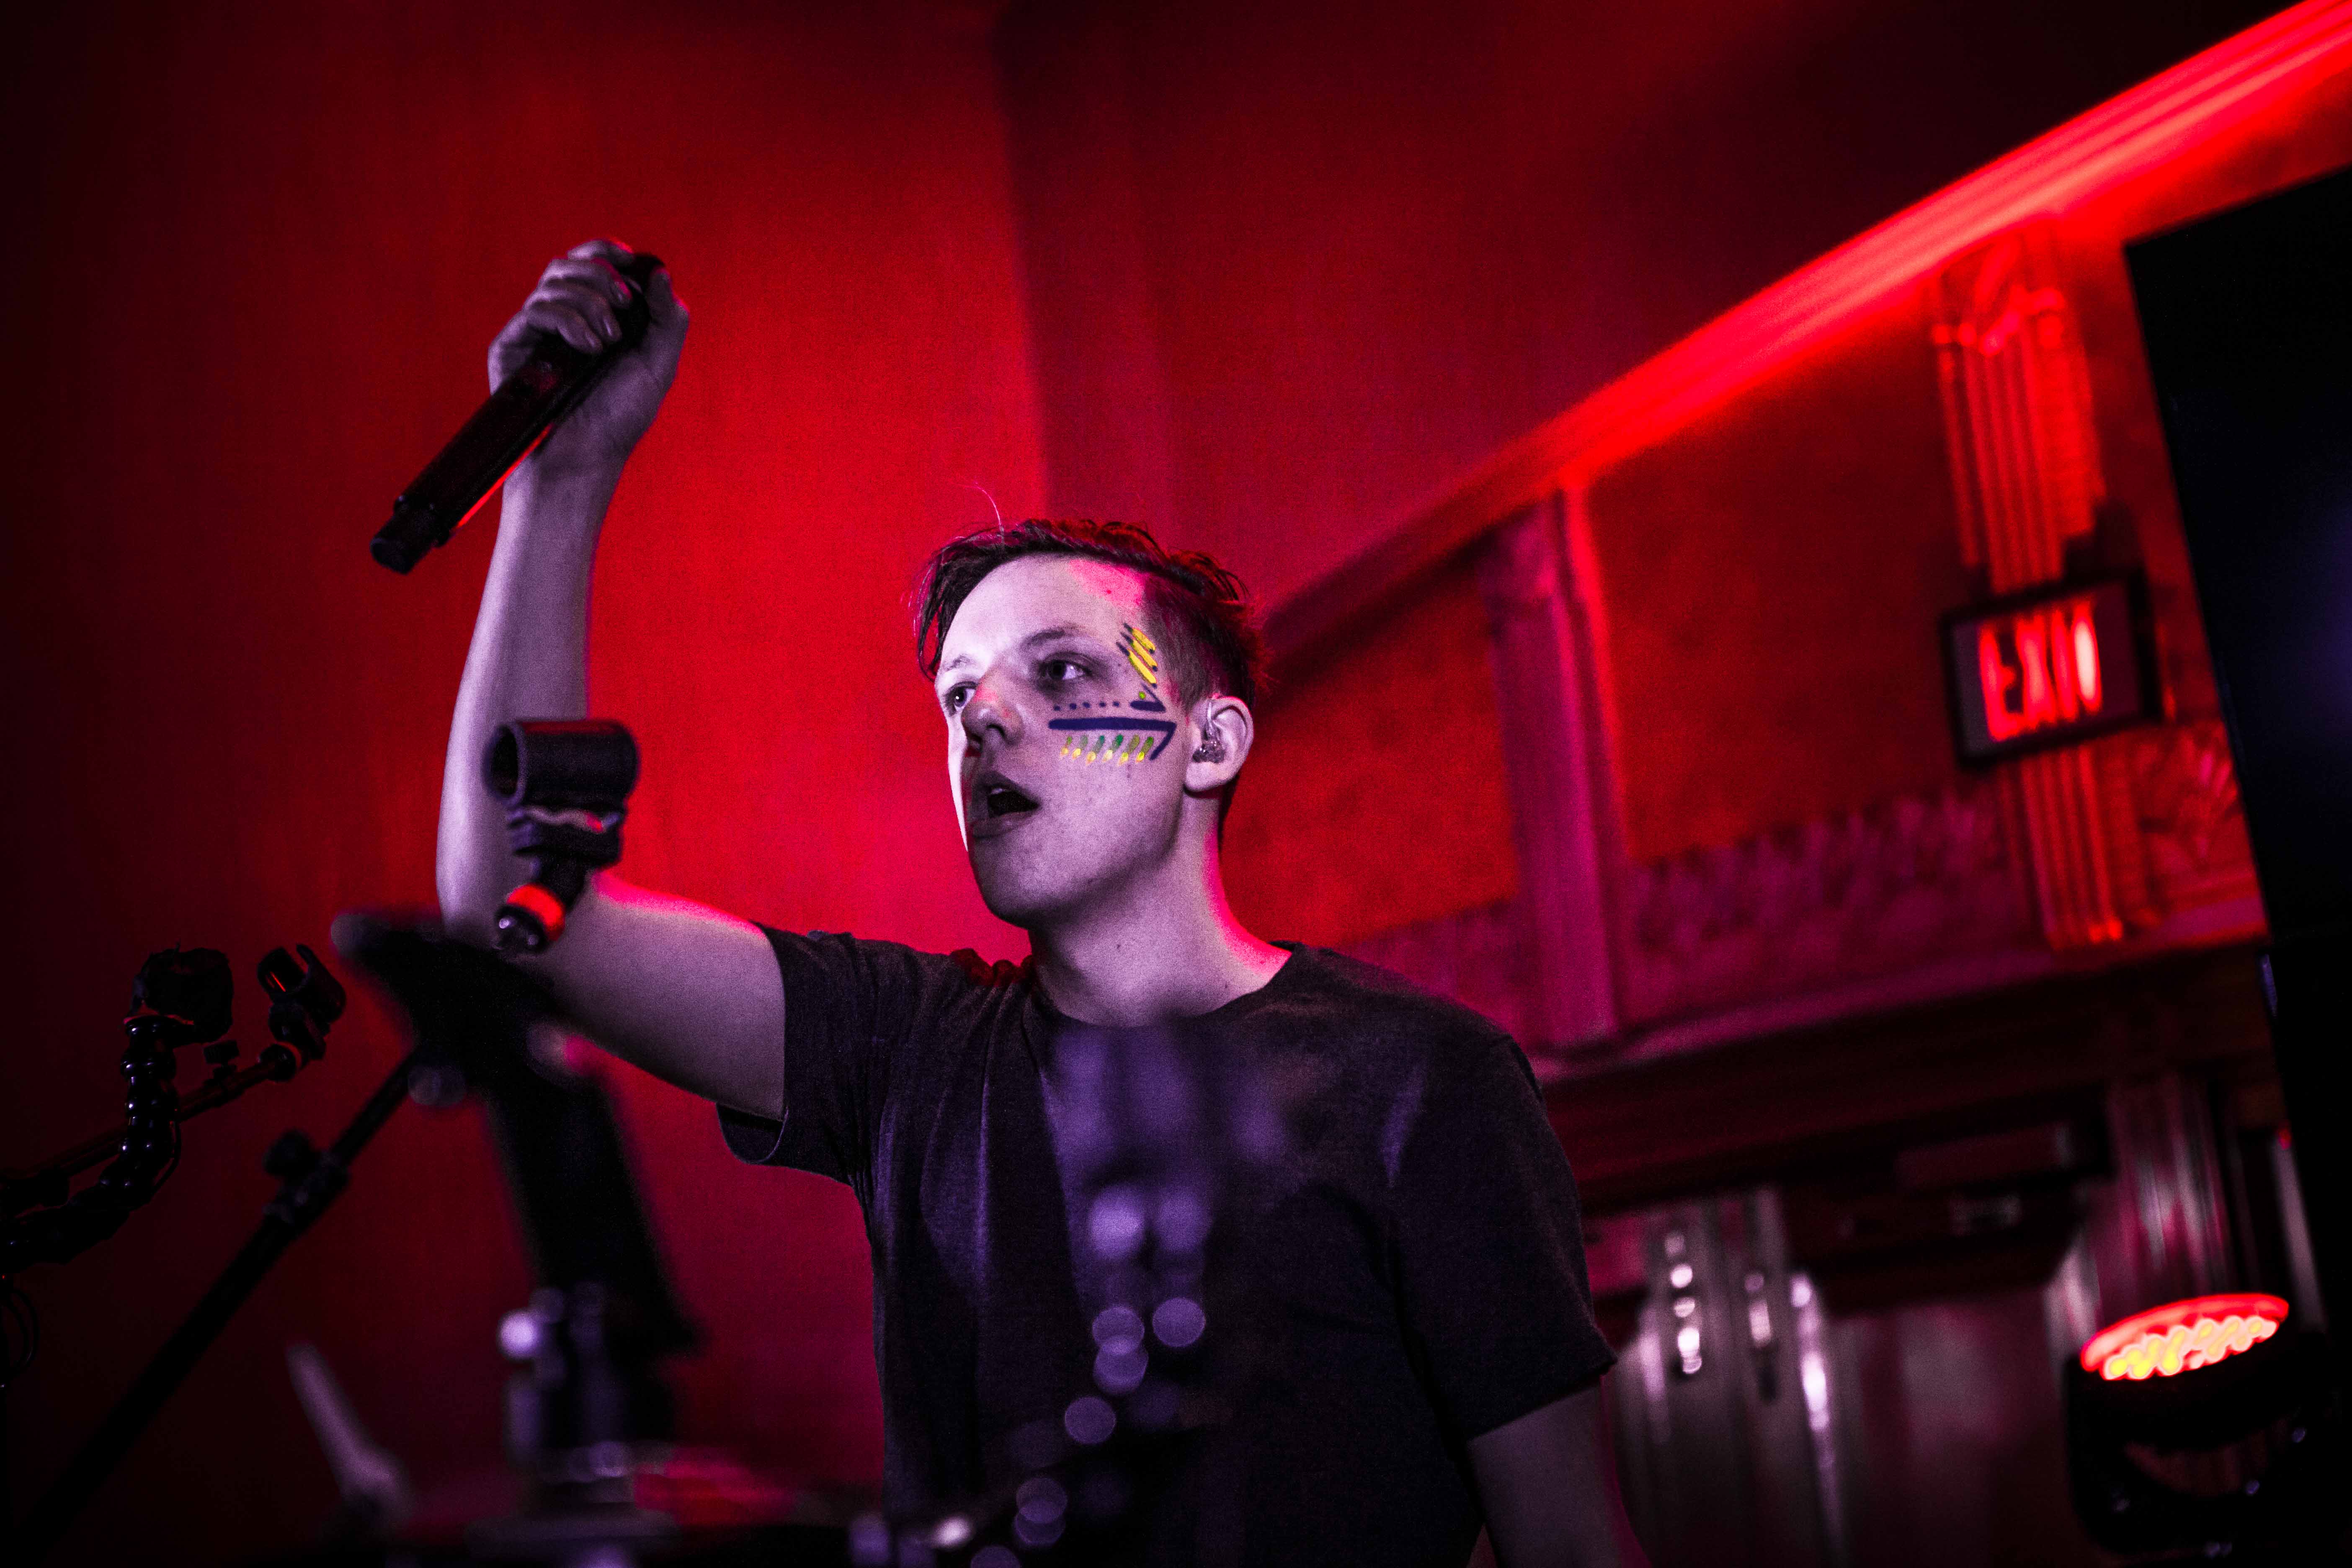 ROBERT DELONG BRINGS ONE-MAN ELECTRONIC ACT TO KIRBY LOBBY SERIES